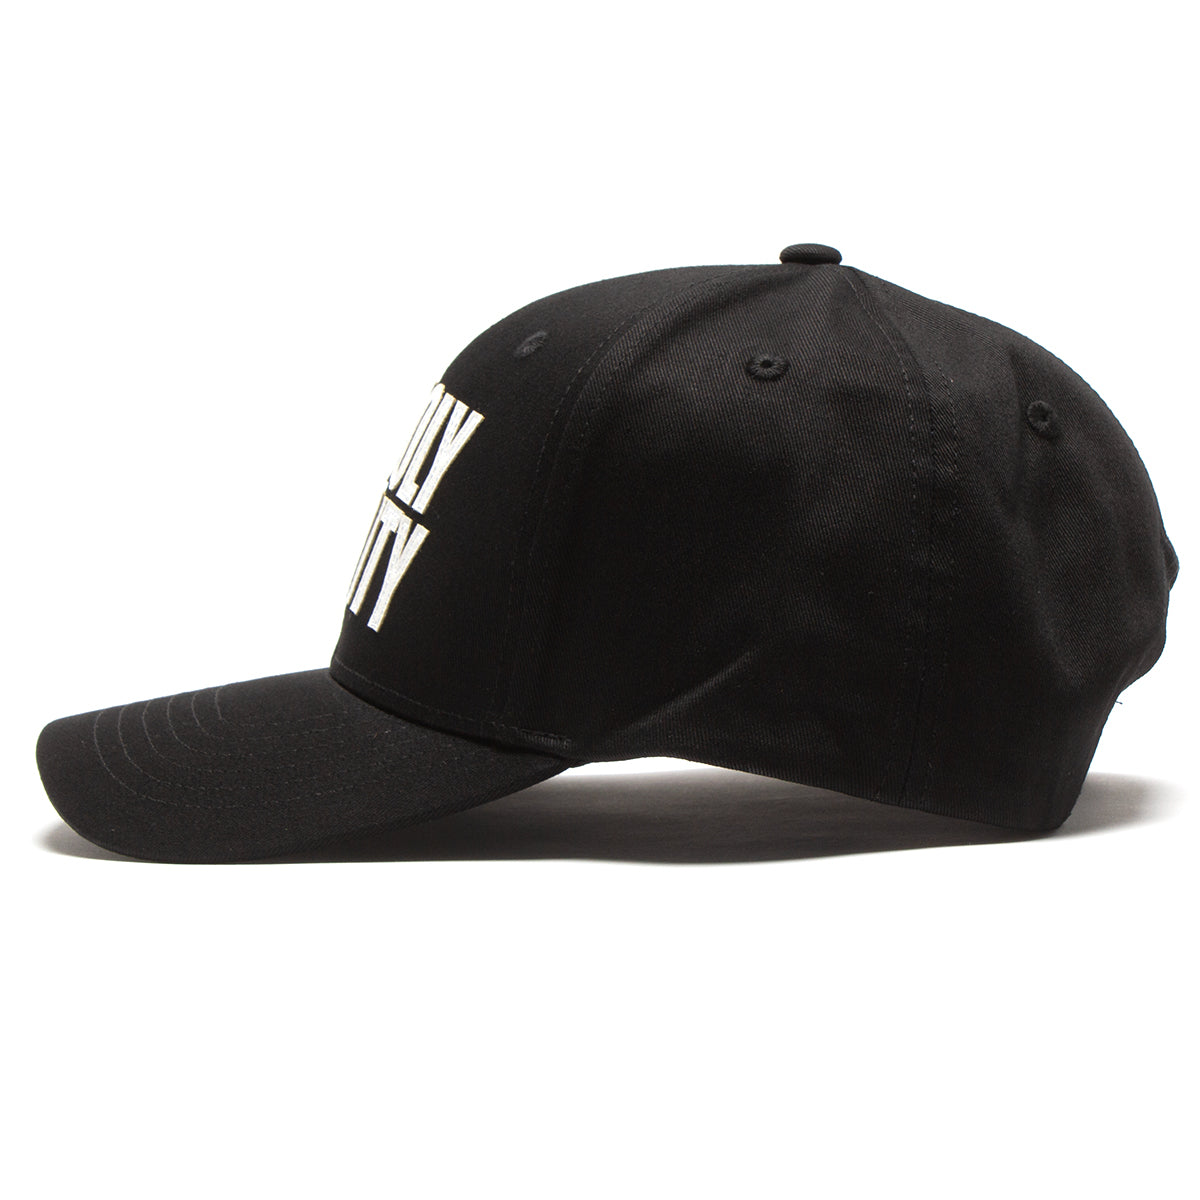 Fucking Awesome | Unholy Trinity Hat Color : Black